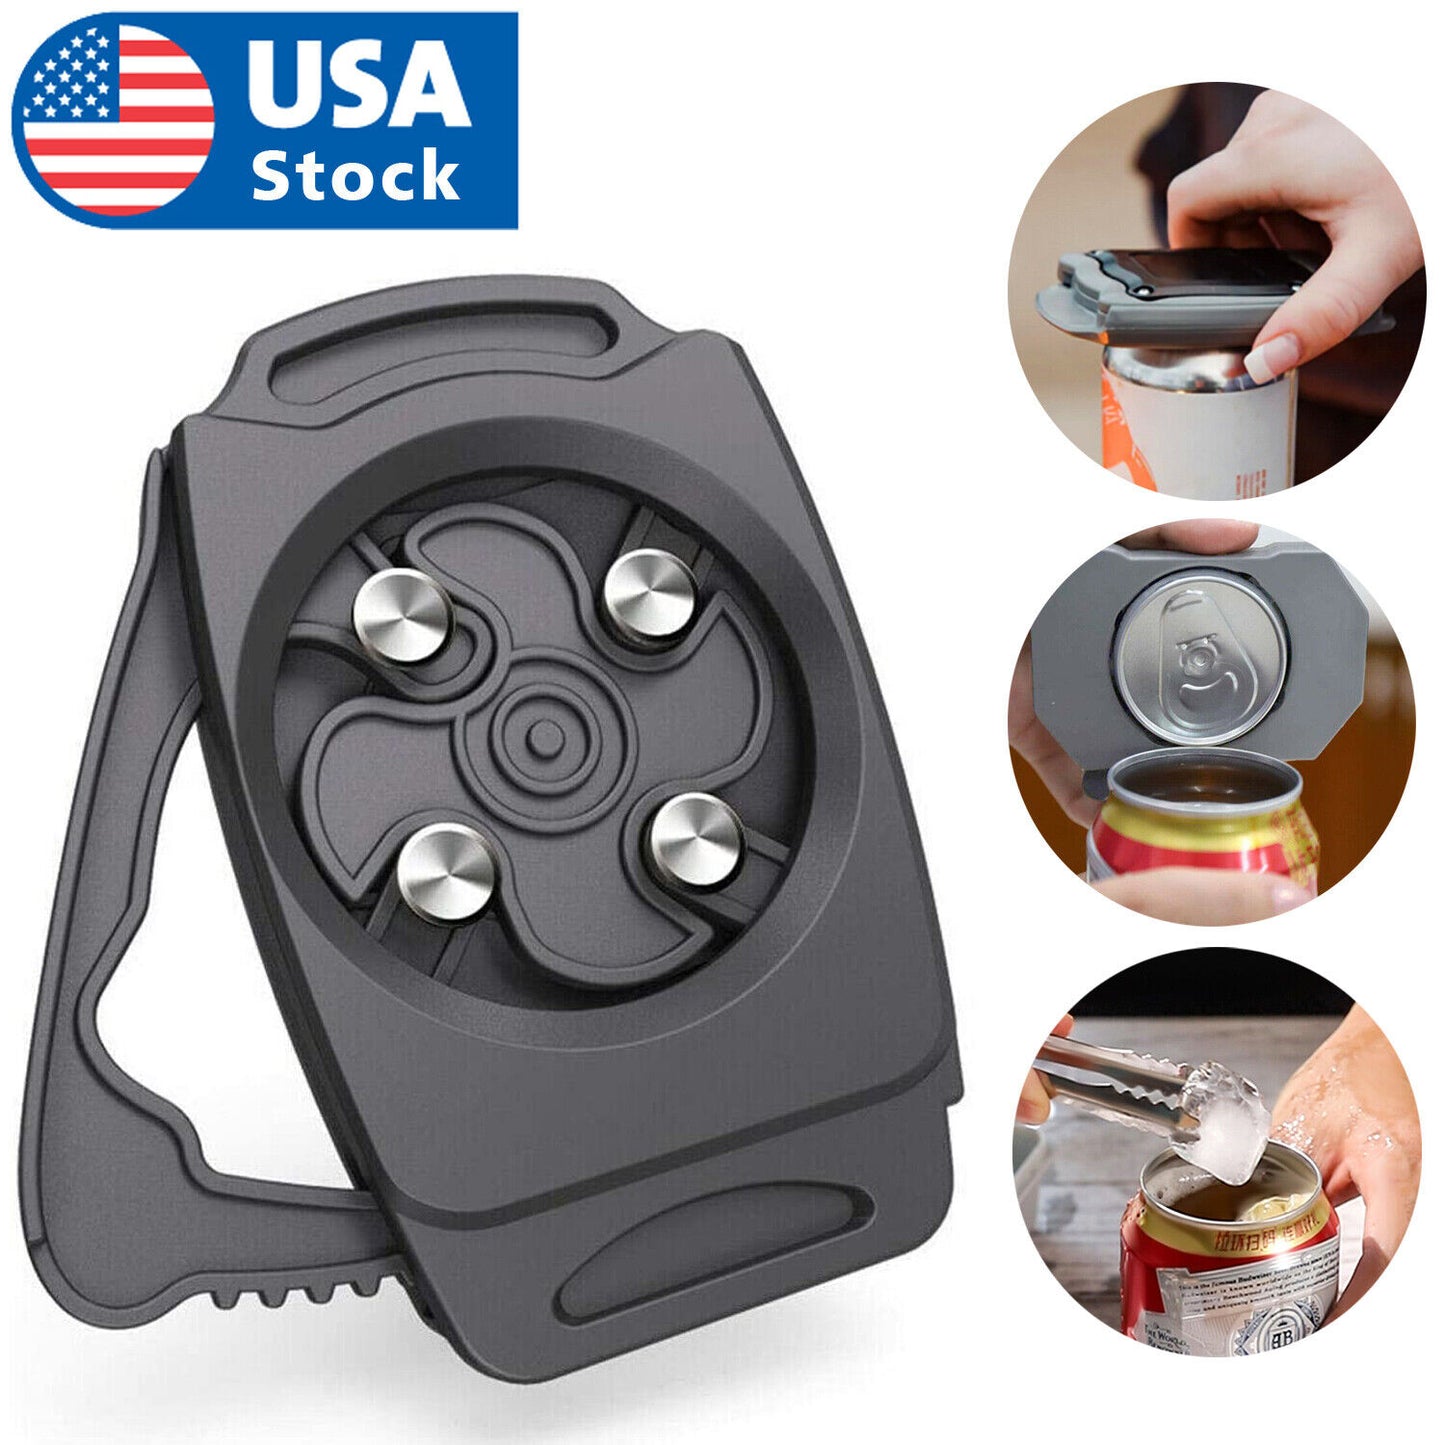 USA Can Opener Bar Tool Safety Manual Opener Household Kitchen Tool